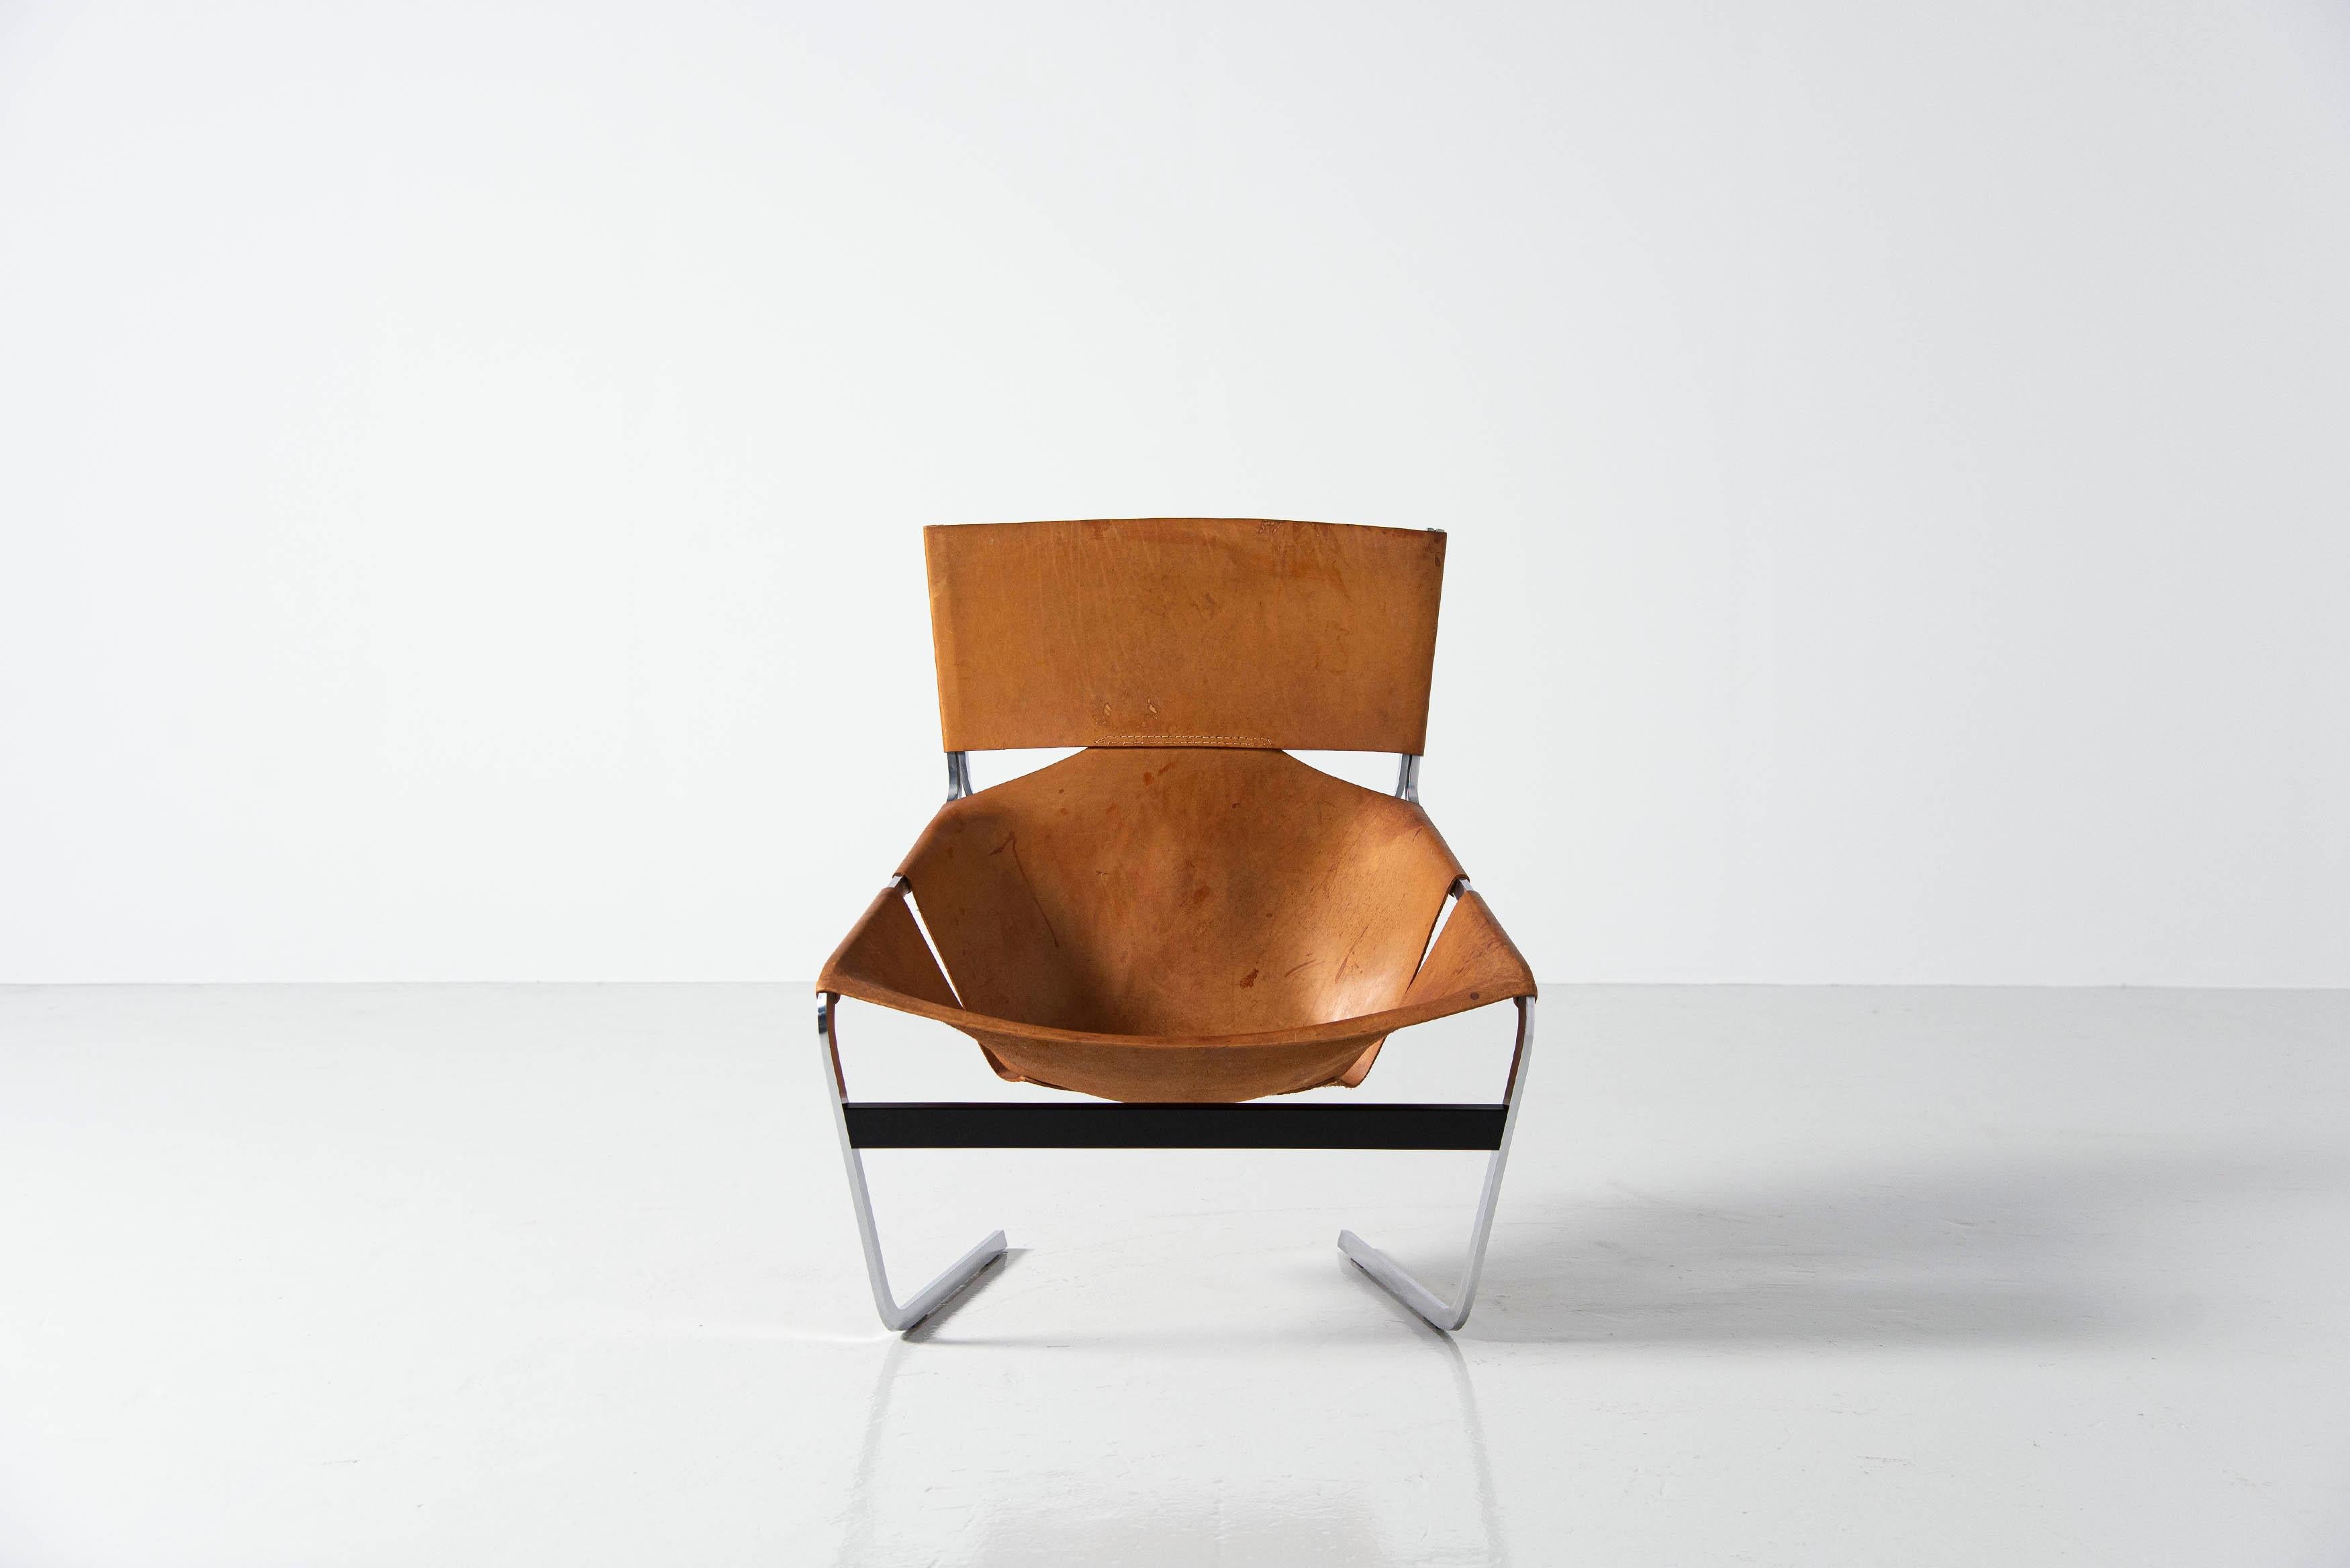 Stunning and fully original F444 lounge chair designed by Pierre Paulin and manufactured in Holland by Artifort in 1963. This is a museum piece especially in this quality. It is very hard to find an original and well kept F444 in this magnificent